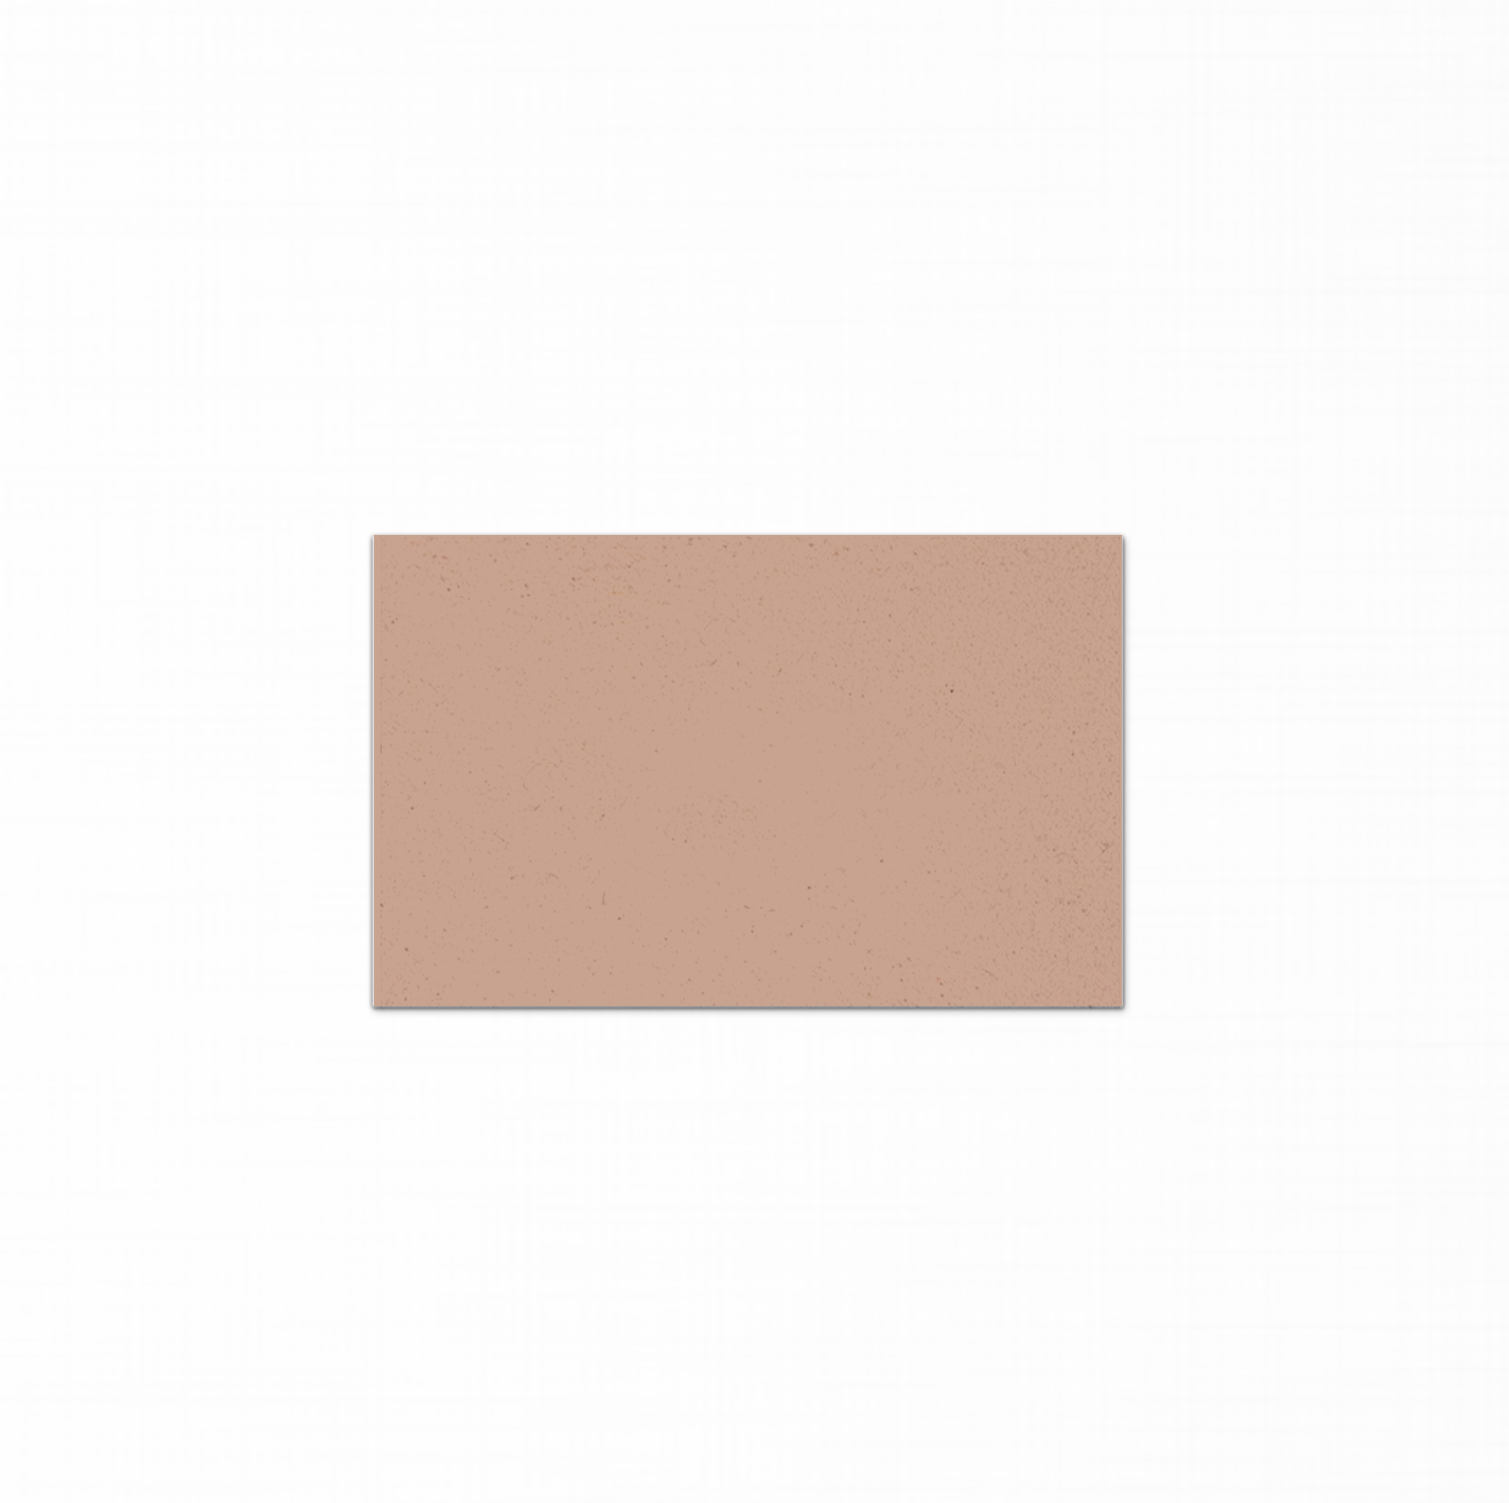 ROMANCE, a feminine and flirty pink cement that&#39;s not too sweet because it leans towards coral. Pair it with black and white for a counterpoint or add a deep brown to balance the softness of the pink. This couture cement color is available exclusively at Desire Tile. 